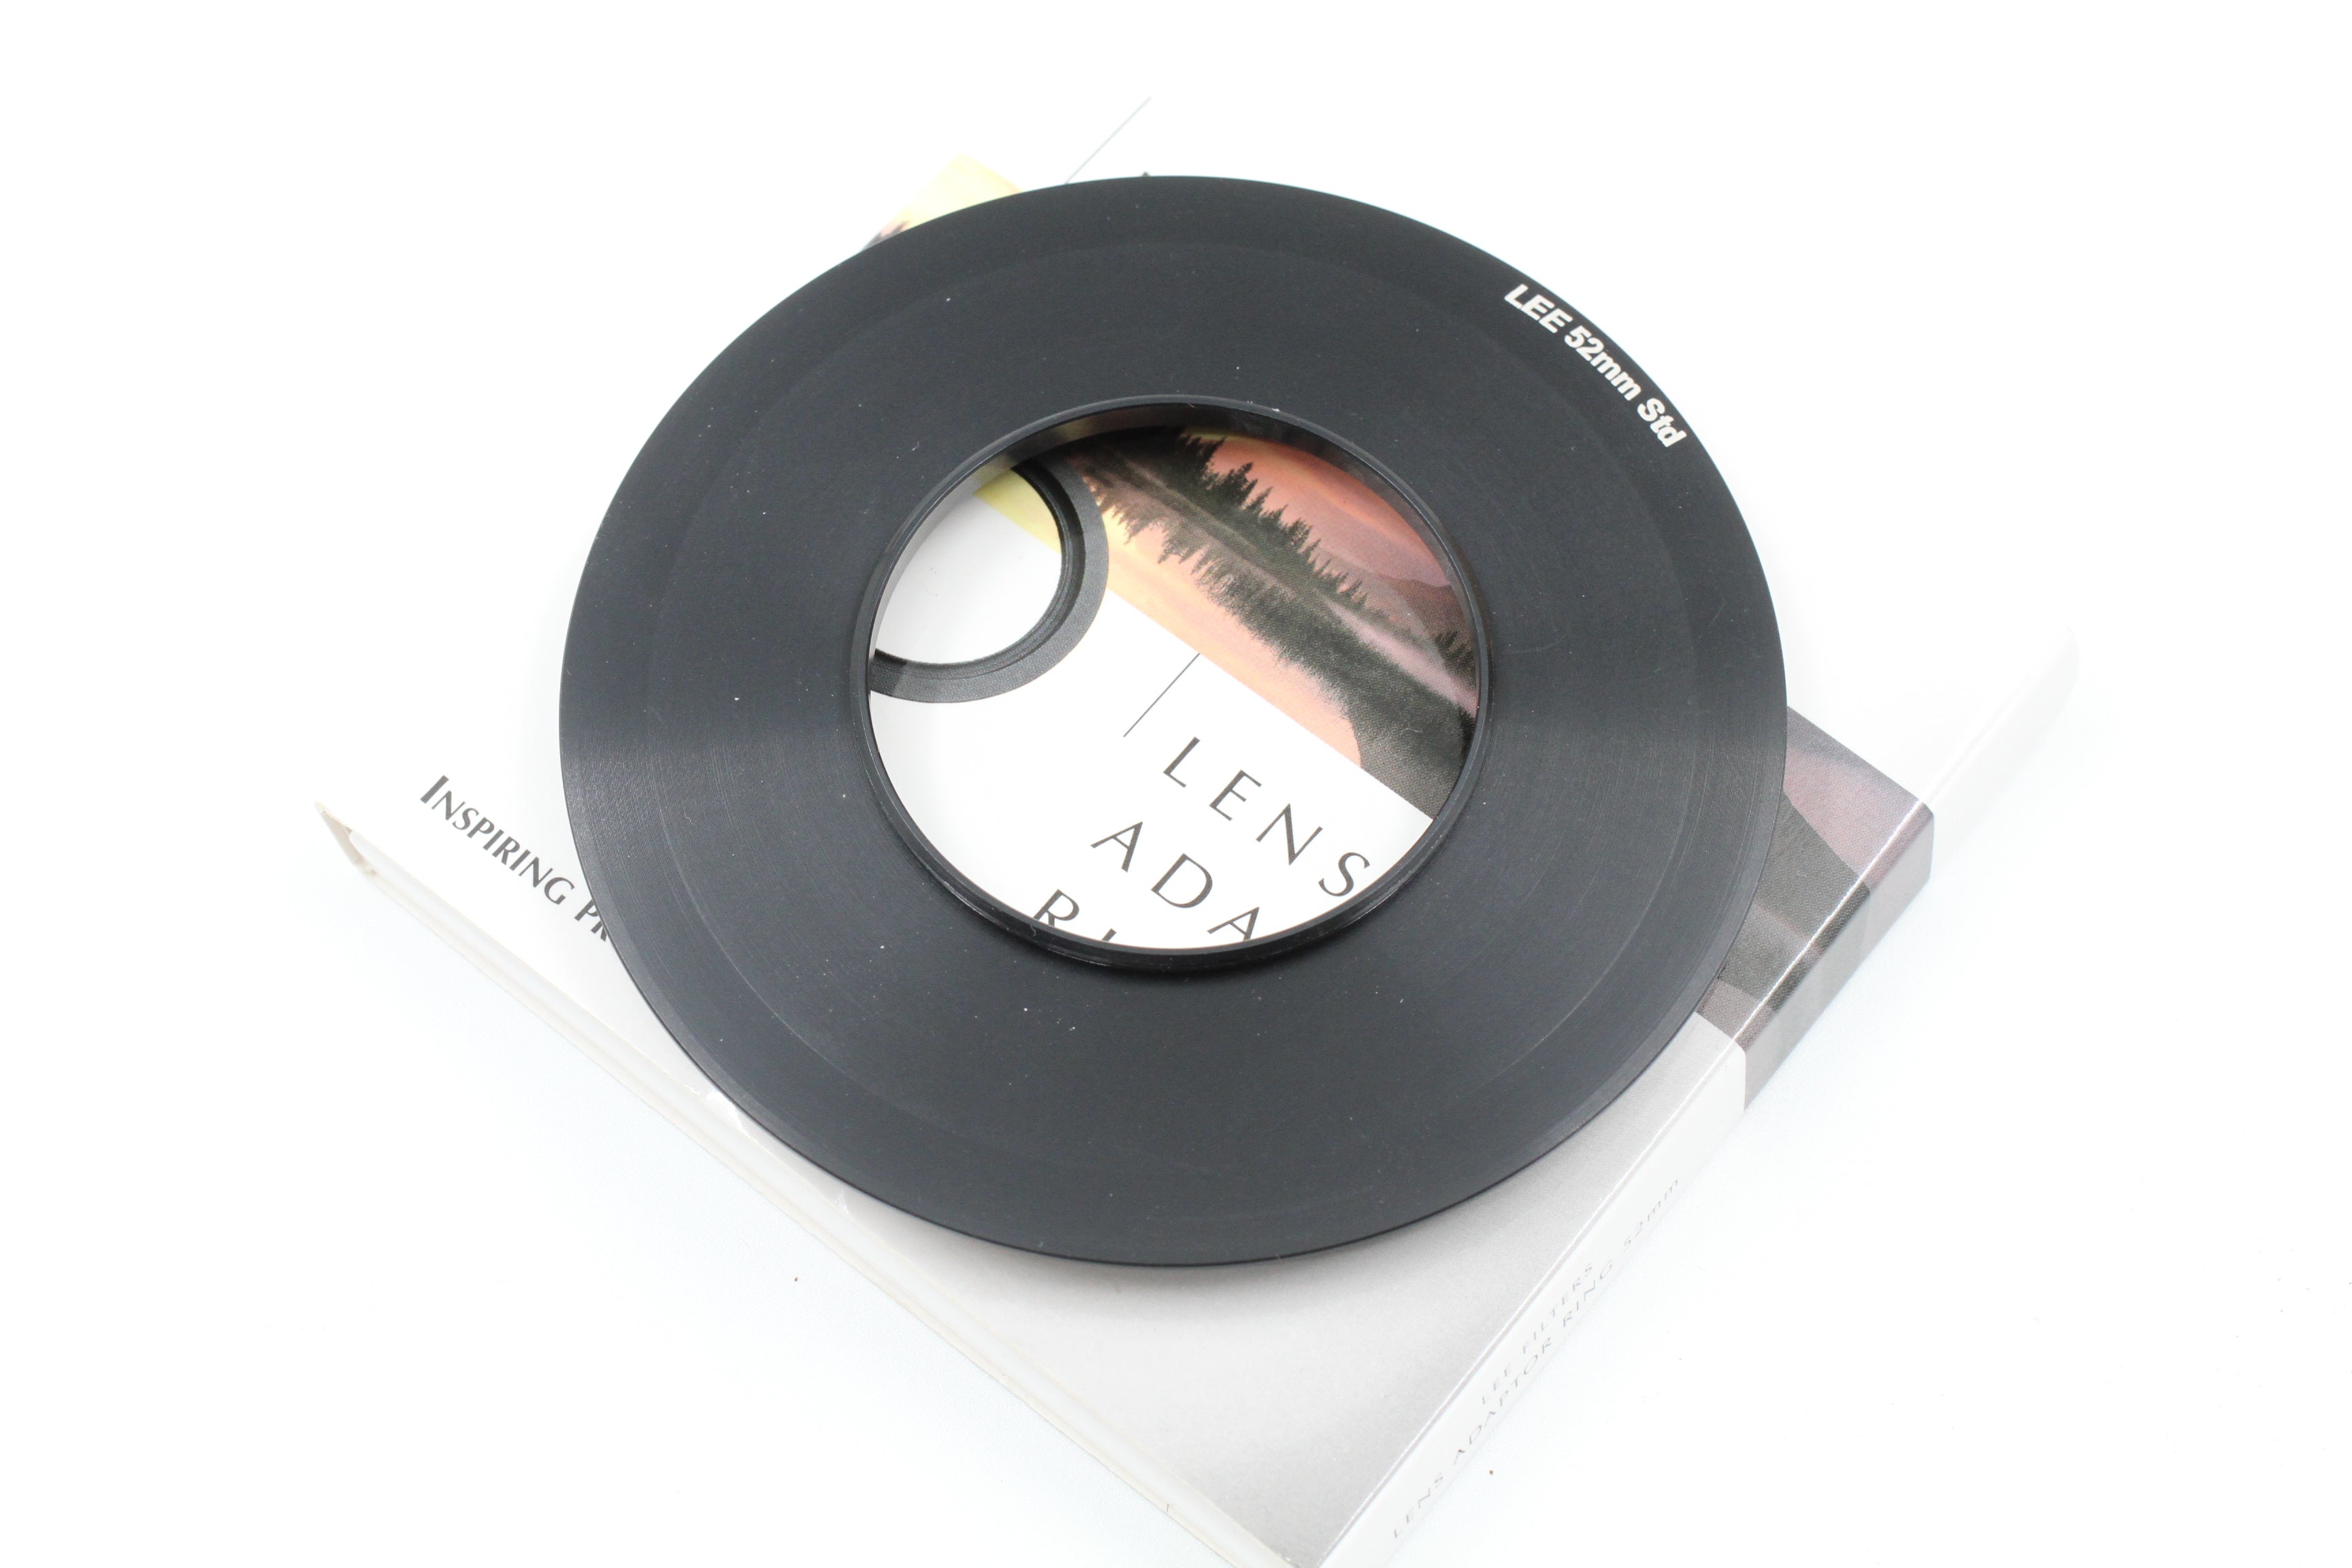 LEE 100 Lens Adapter Ring 52mm, Boxed